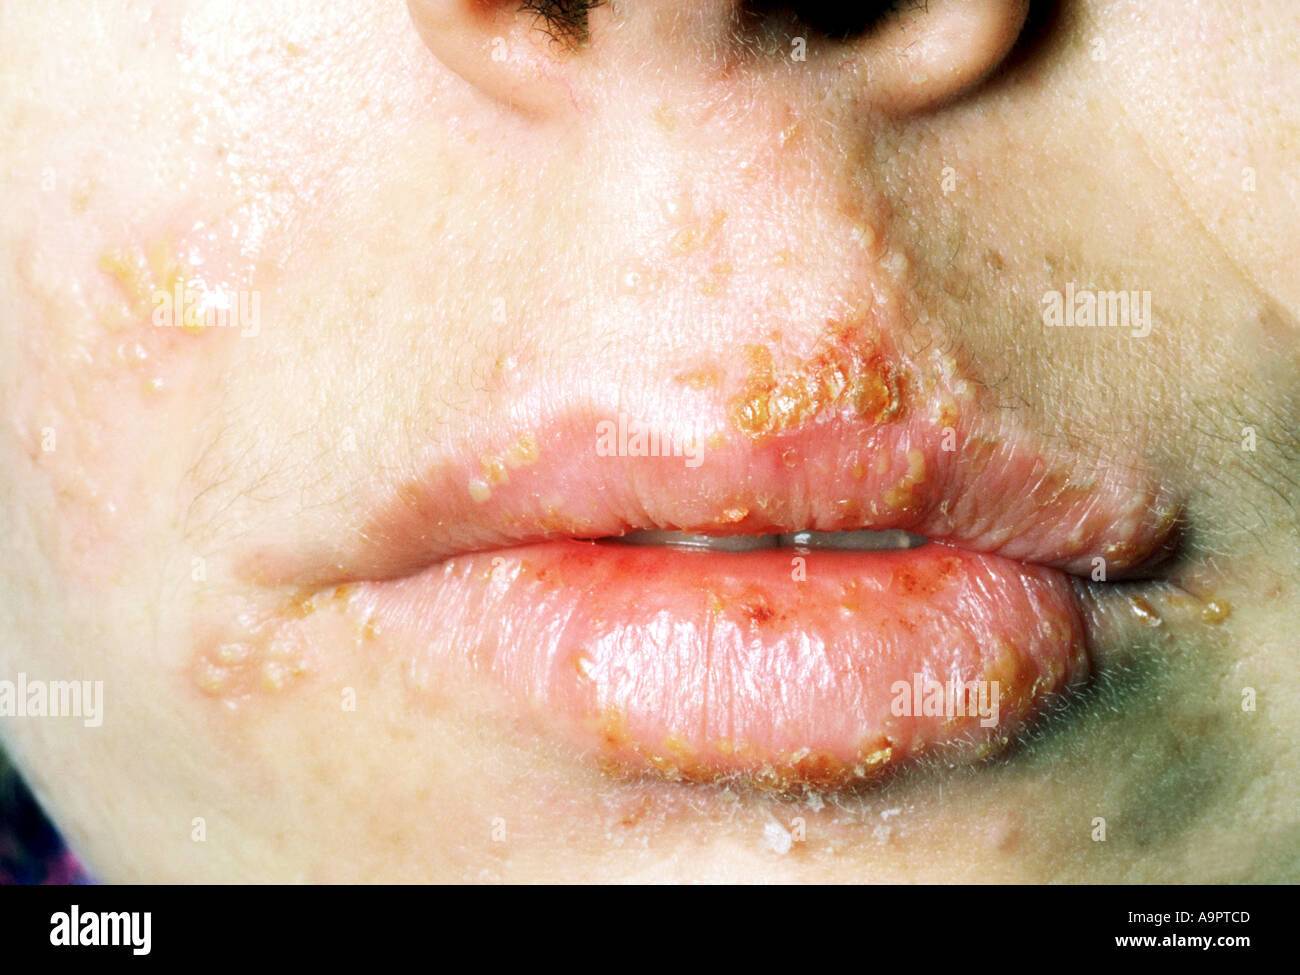 Herpes Simplex Cold Sores On Lips And Face Stock Photo Alamy